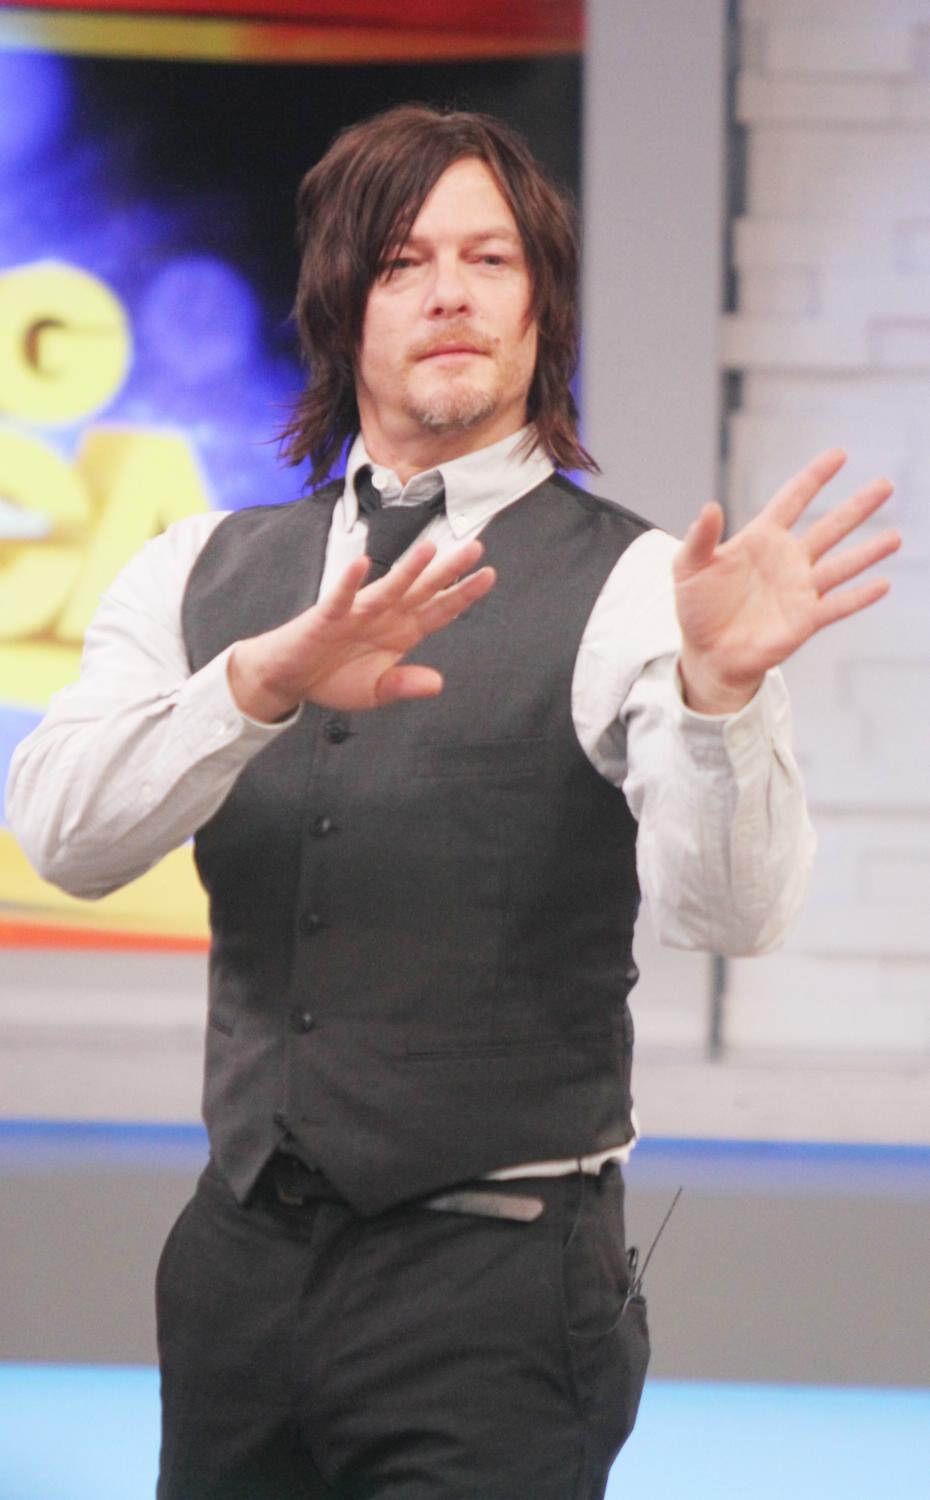 Norman Reedus Promotes The Walking Dead on GMA